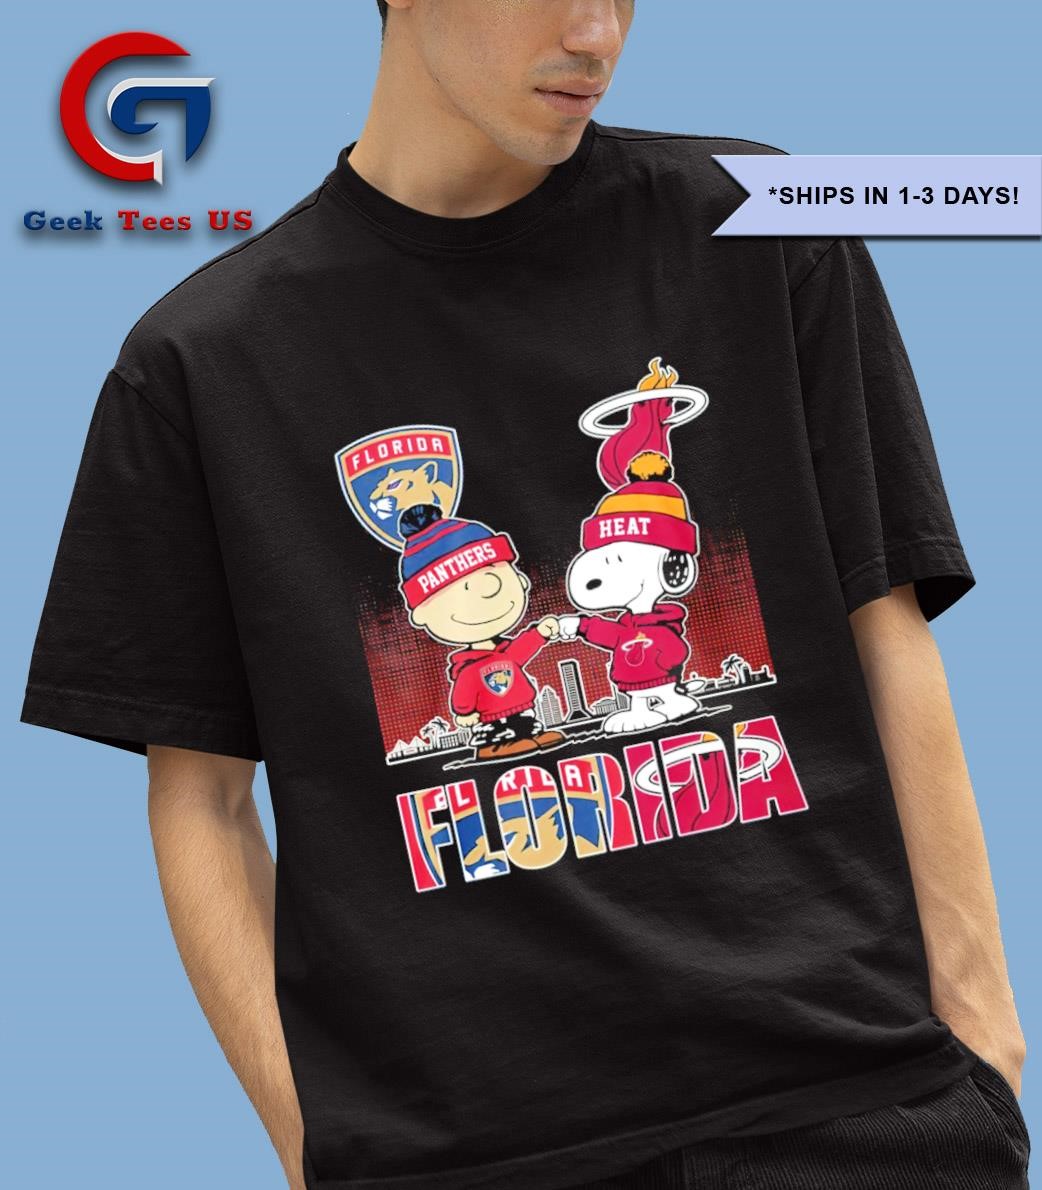 Snoopy Miami Heat and Charlie Brown Florida Panthers proud of State Skyline logo shirt
geekteesus.com/product/snoopy…
#shirt #trending #gift #geekteesus #geekshirt #GEEKS #Snoopy #miamiheat #CharlieBrown #FloridaPanthers